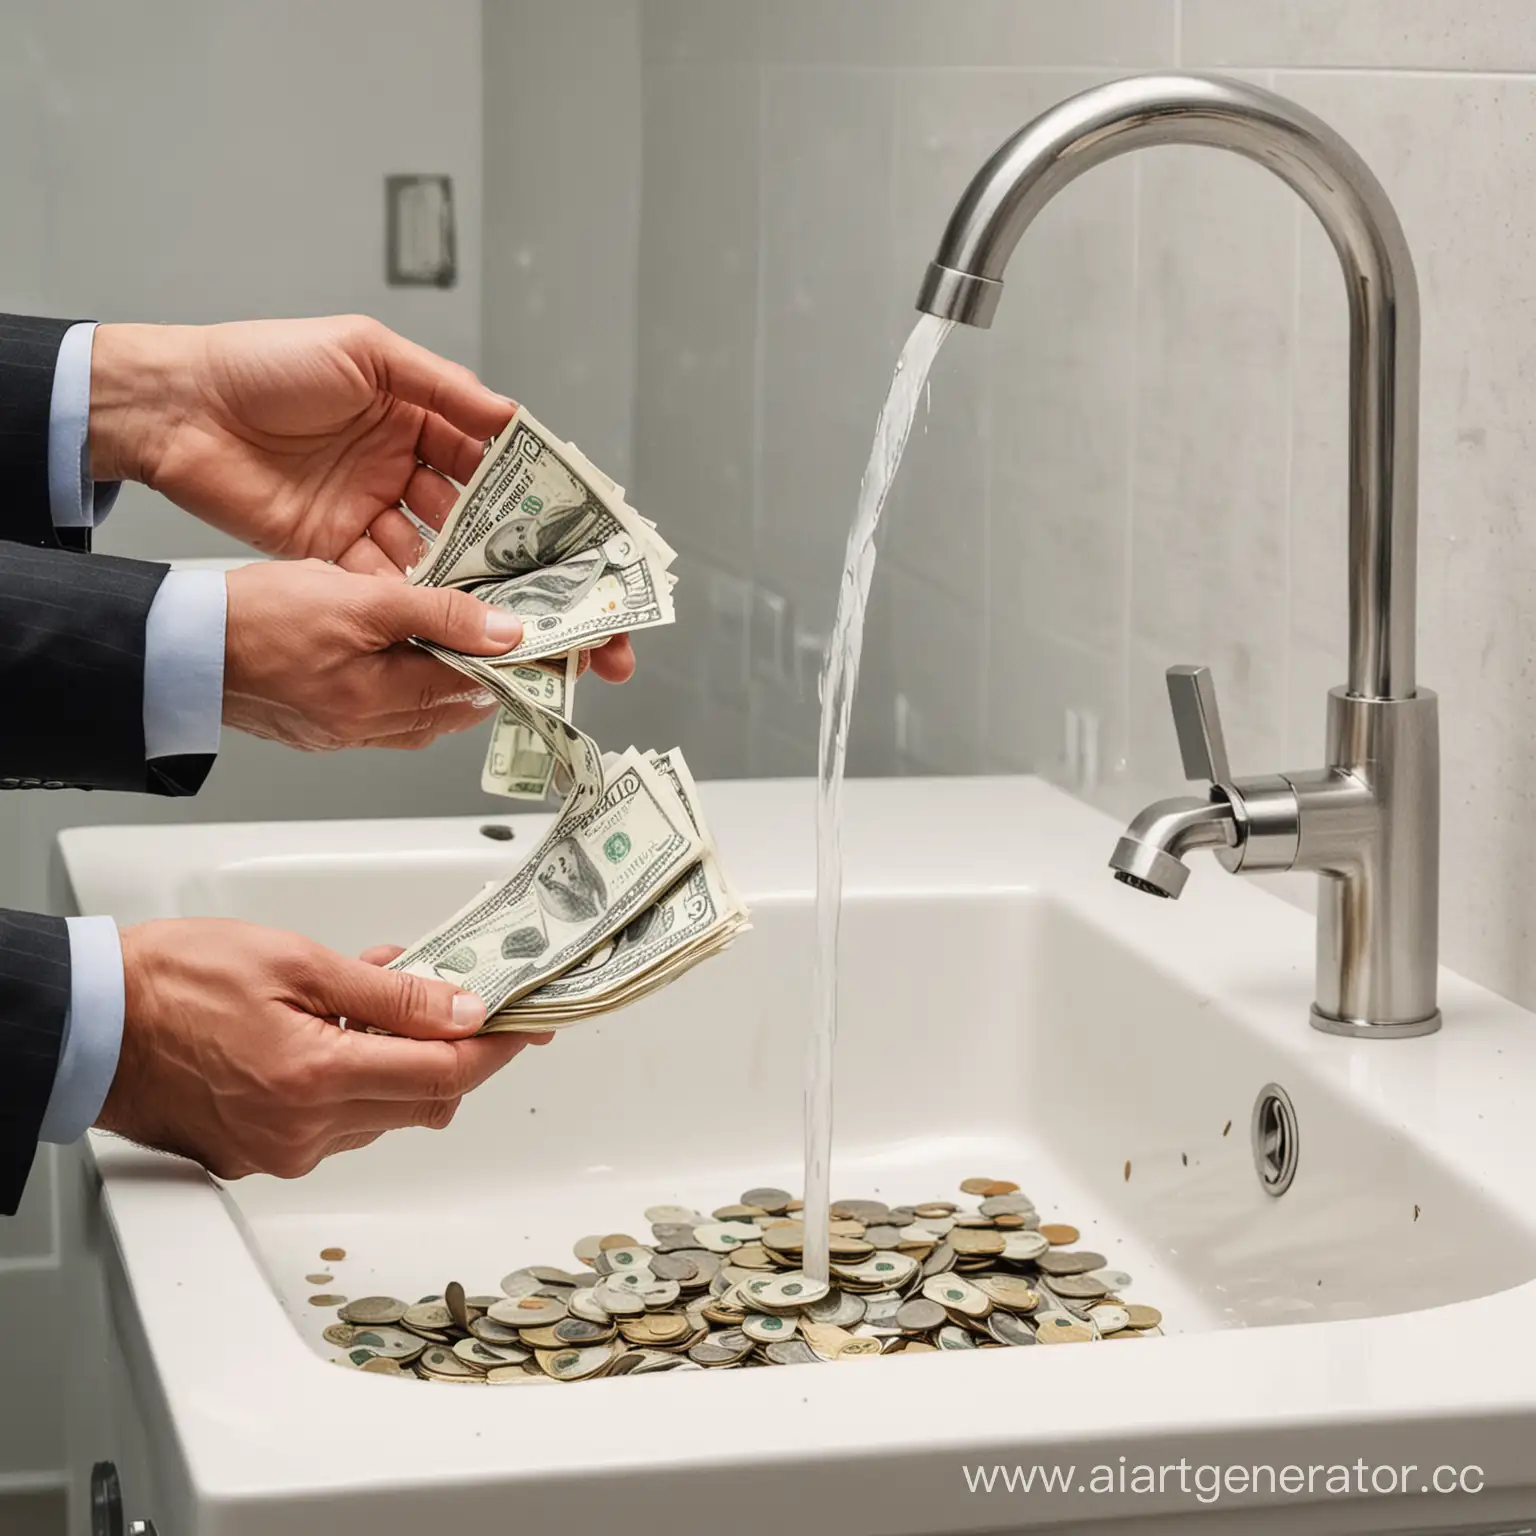 Man-Wasting-Money-by-Throwing-Cash-into-the-Sink